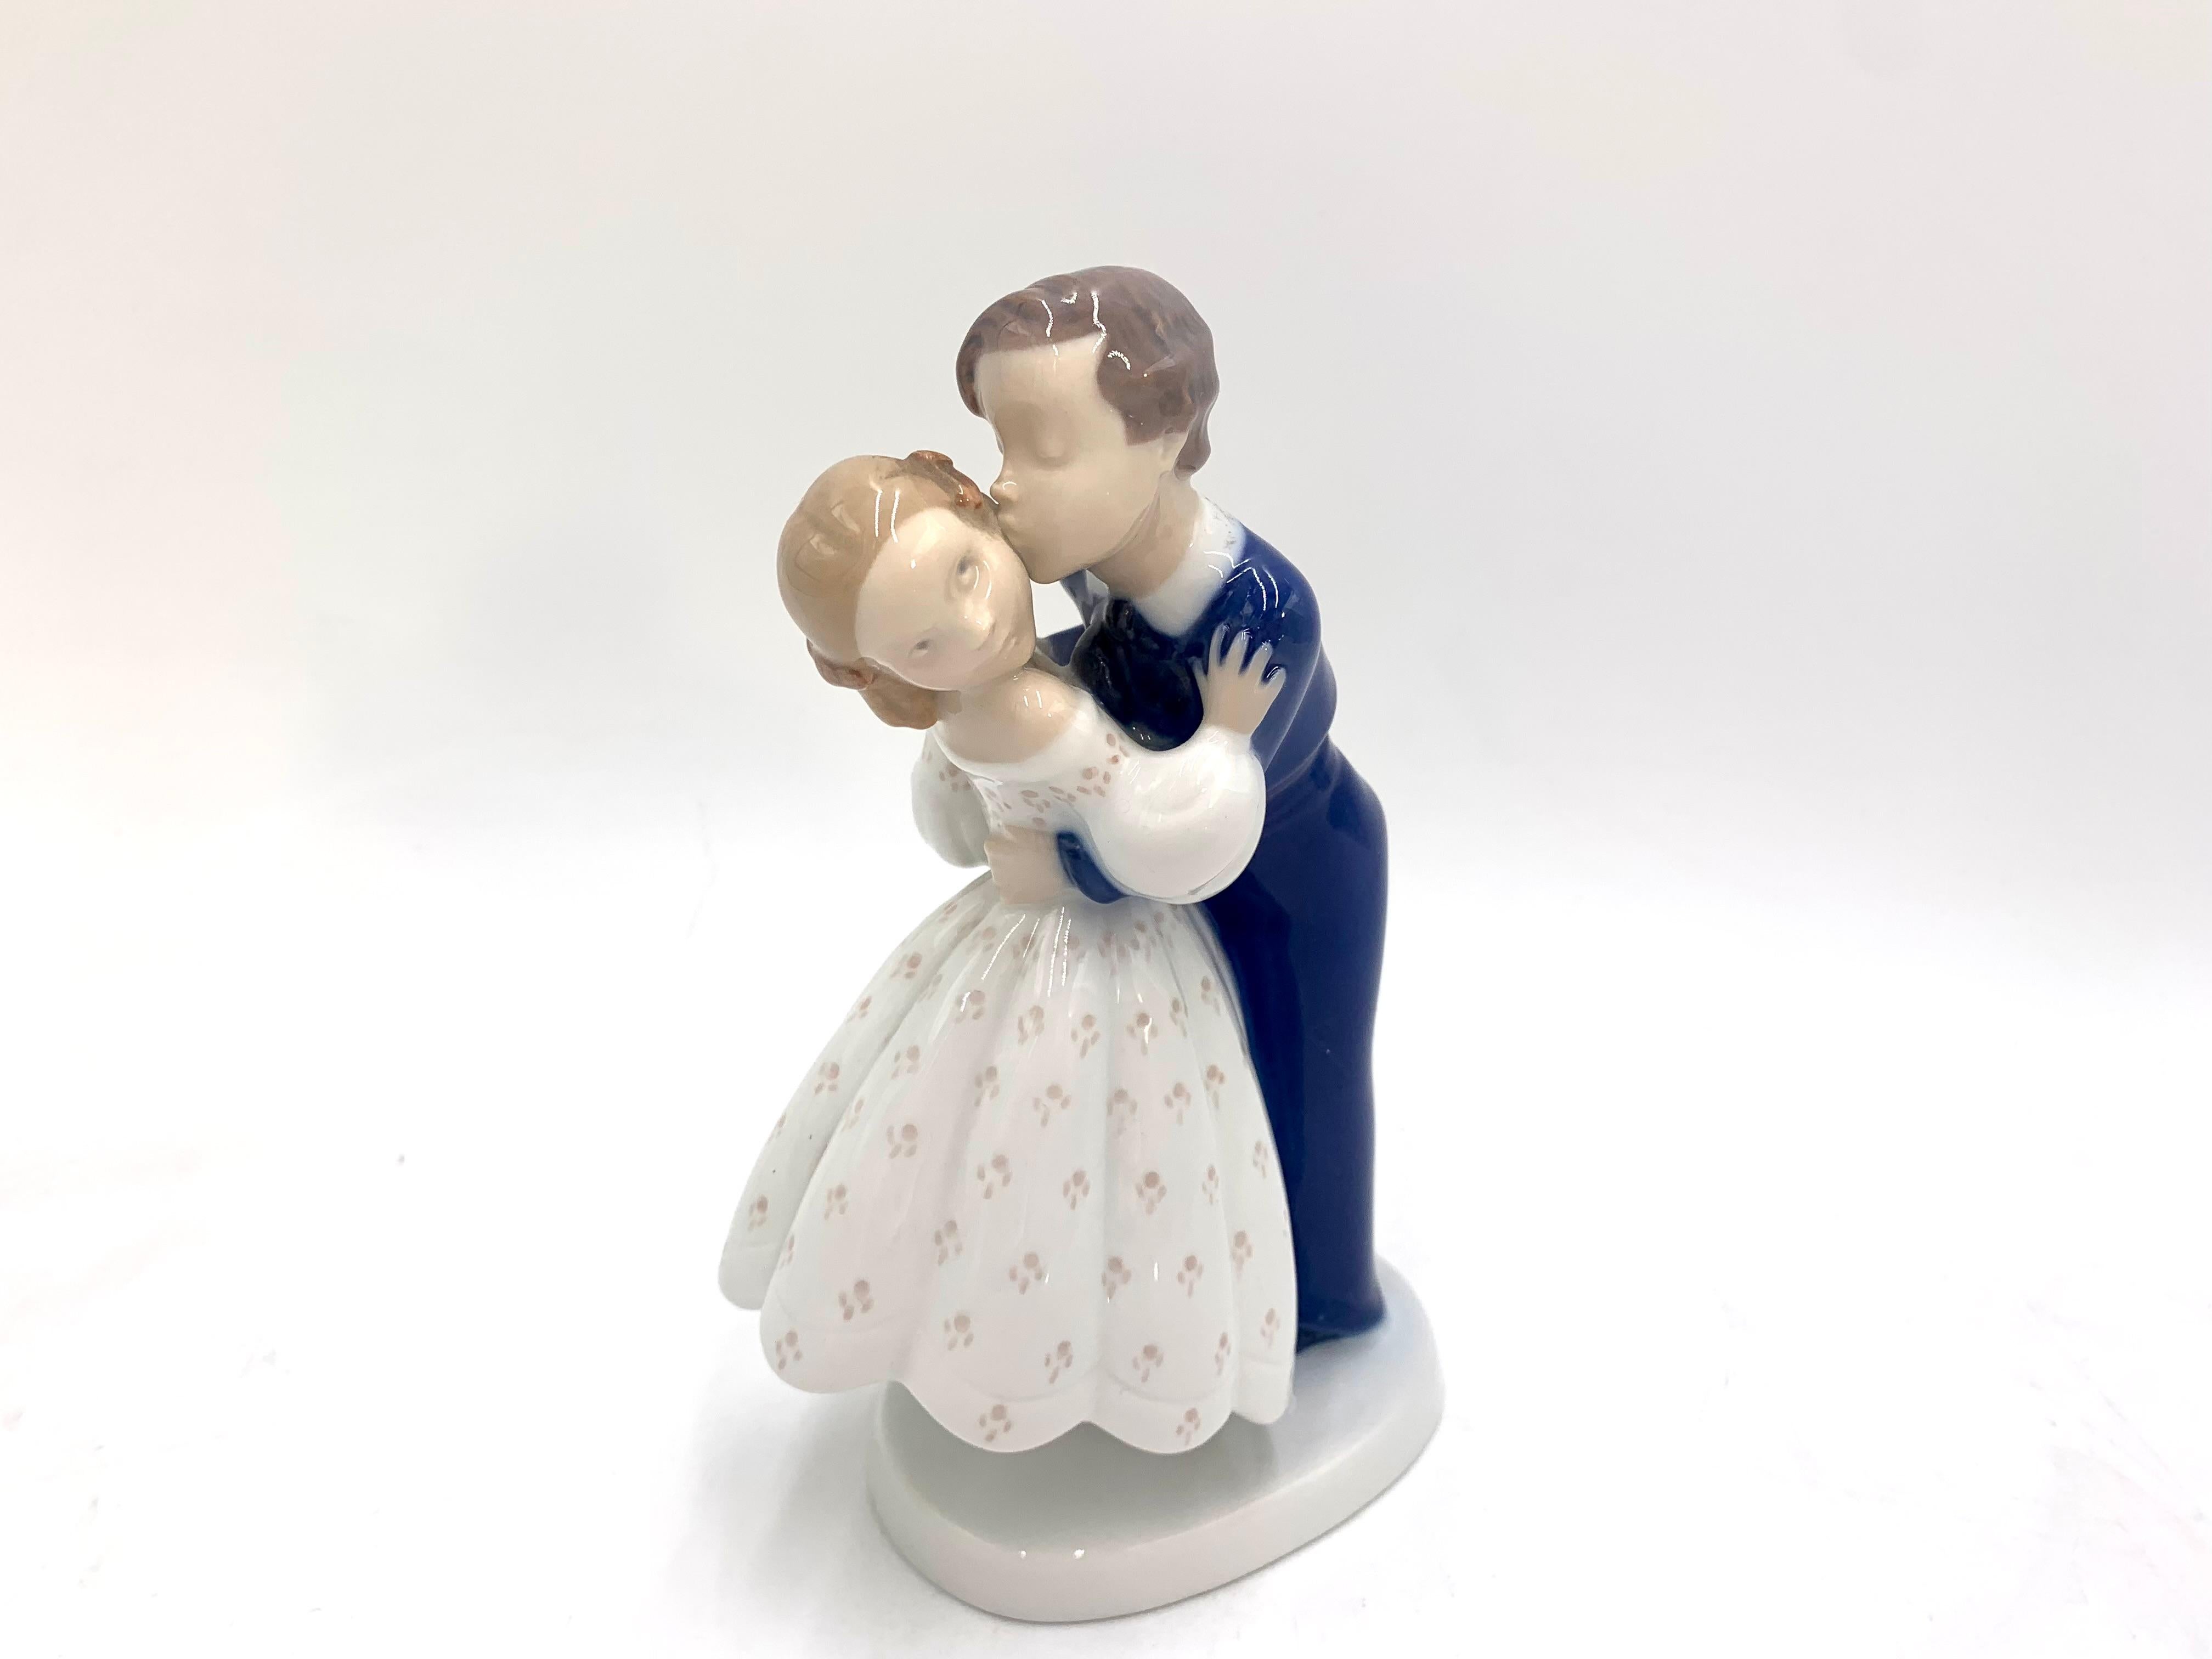 Porcelain figurine of a couple - a boy stealing a kiss from a girl

Made in Denmark by Bing & Grondahl

Manufactured in the 1960s / 1970s. XX century

Model number # 2162

Very good condition, no damage

Measures: height 19.5 cm width 11.5